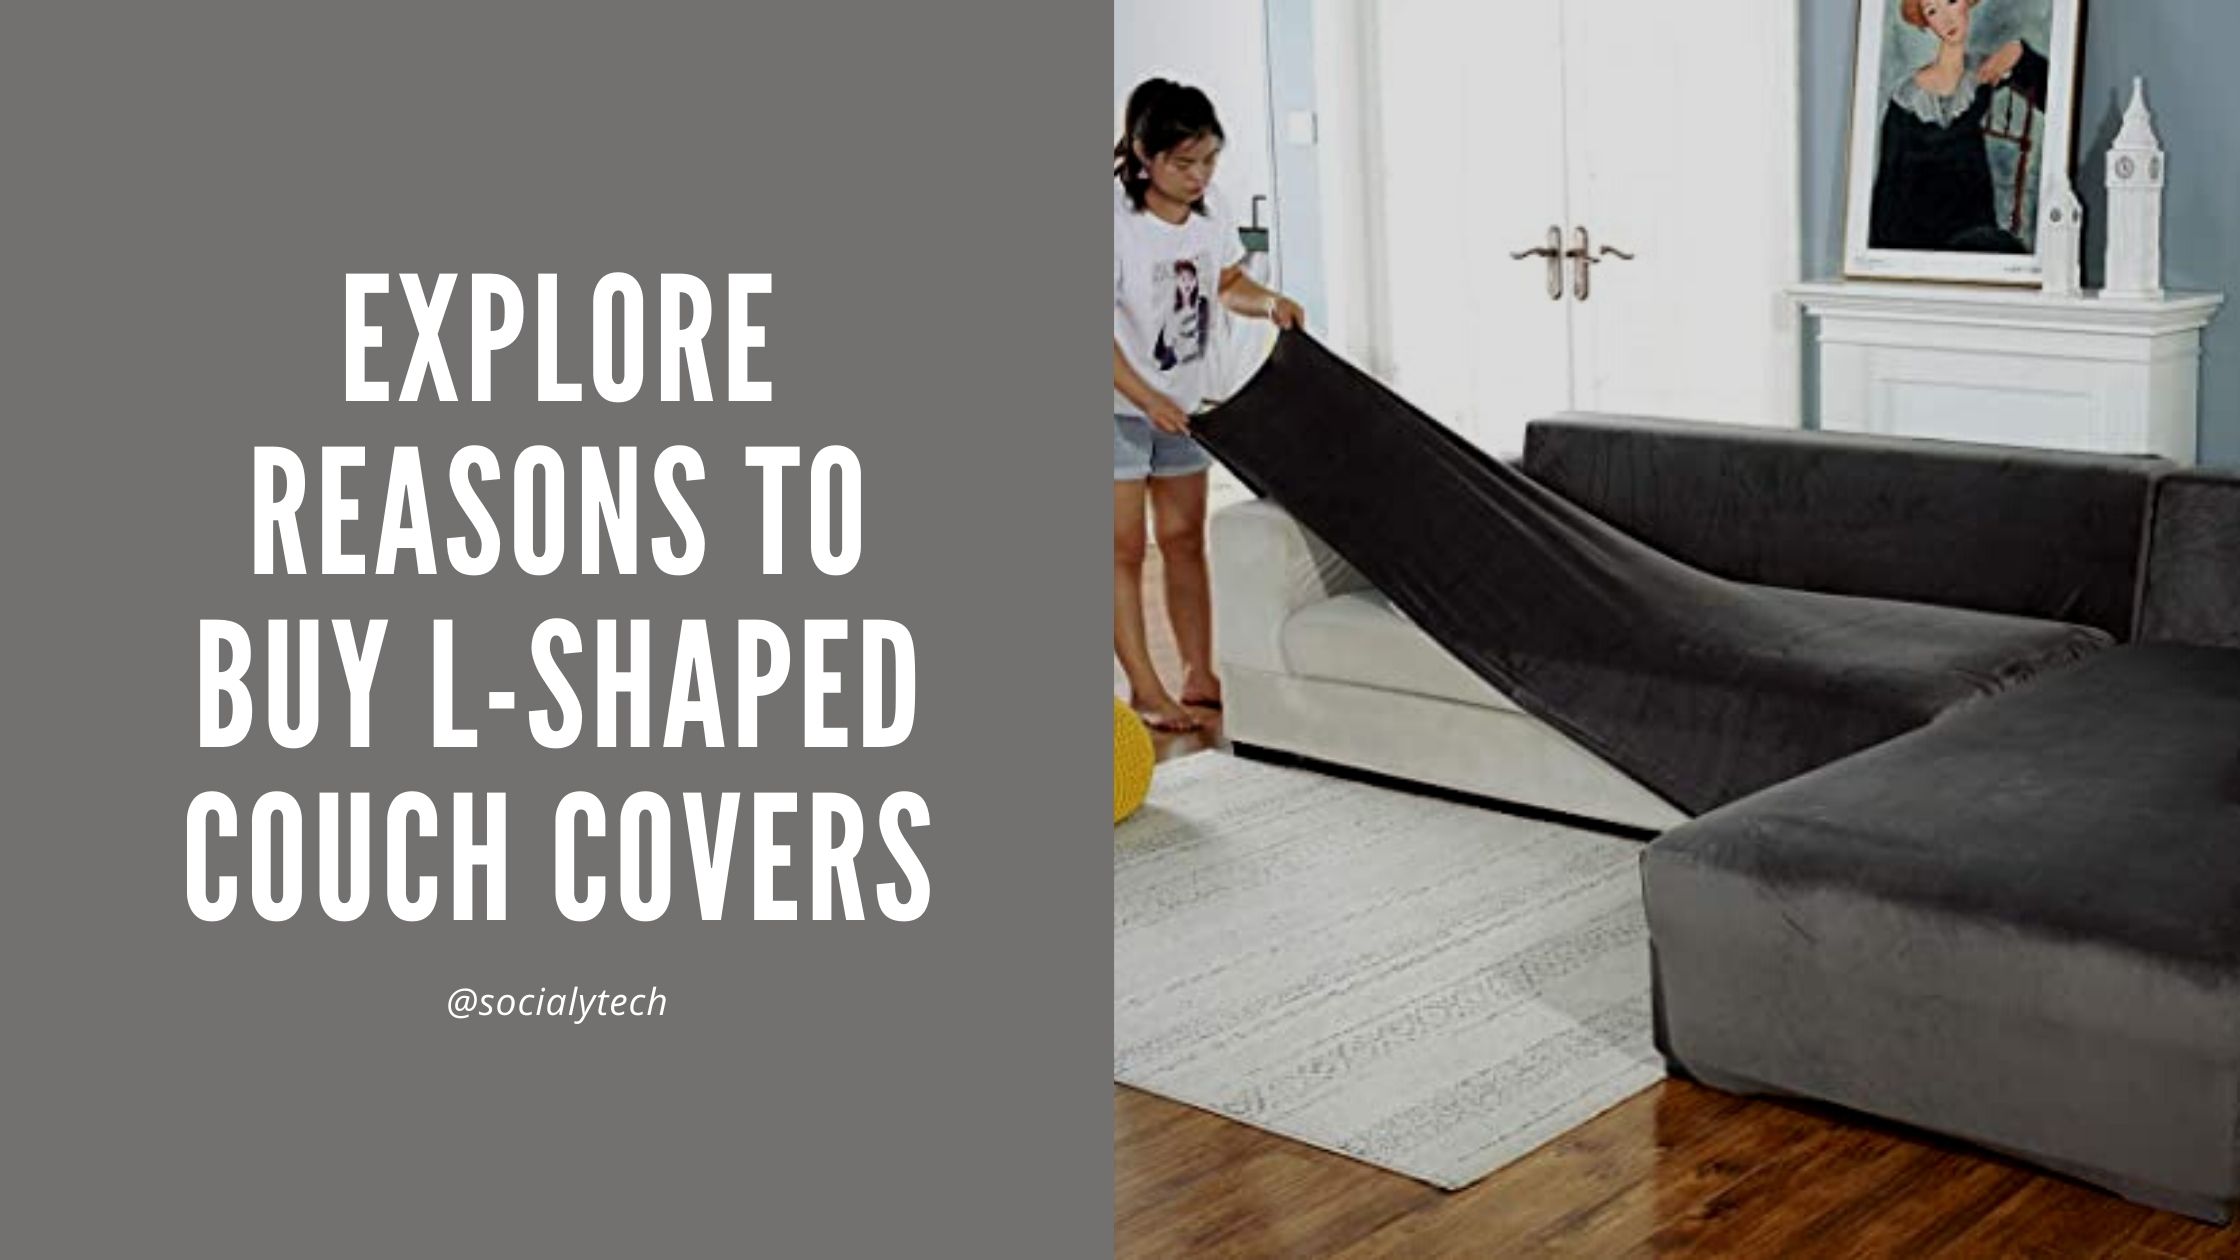 Explore Reasons to Buy L-shaped Couch Covers